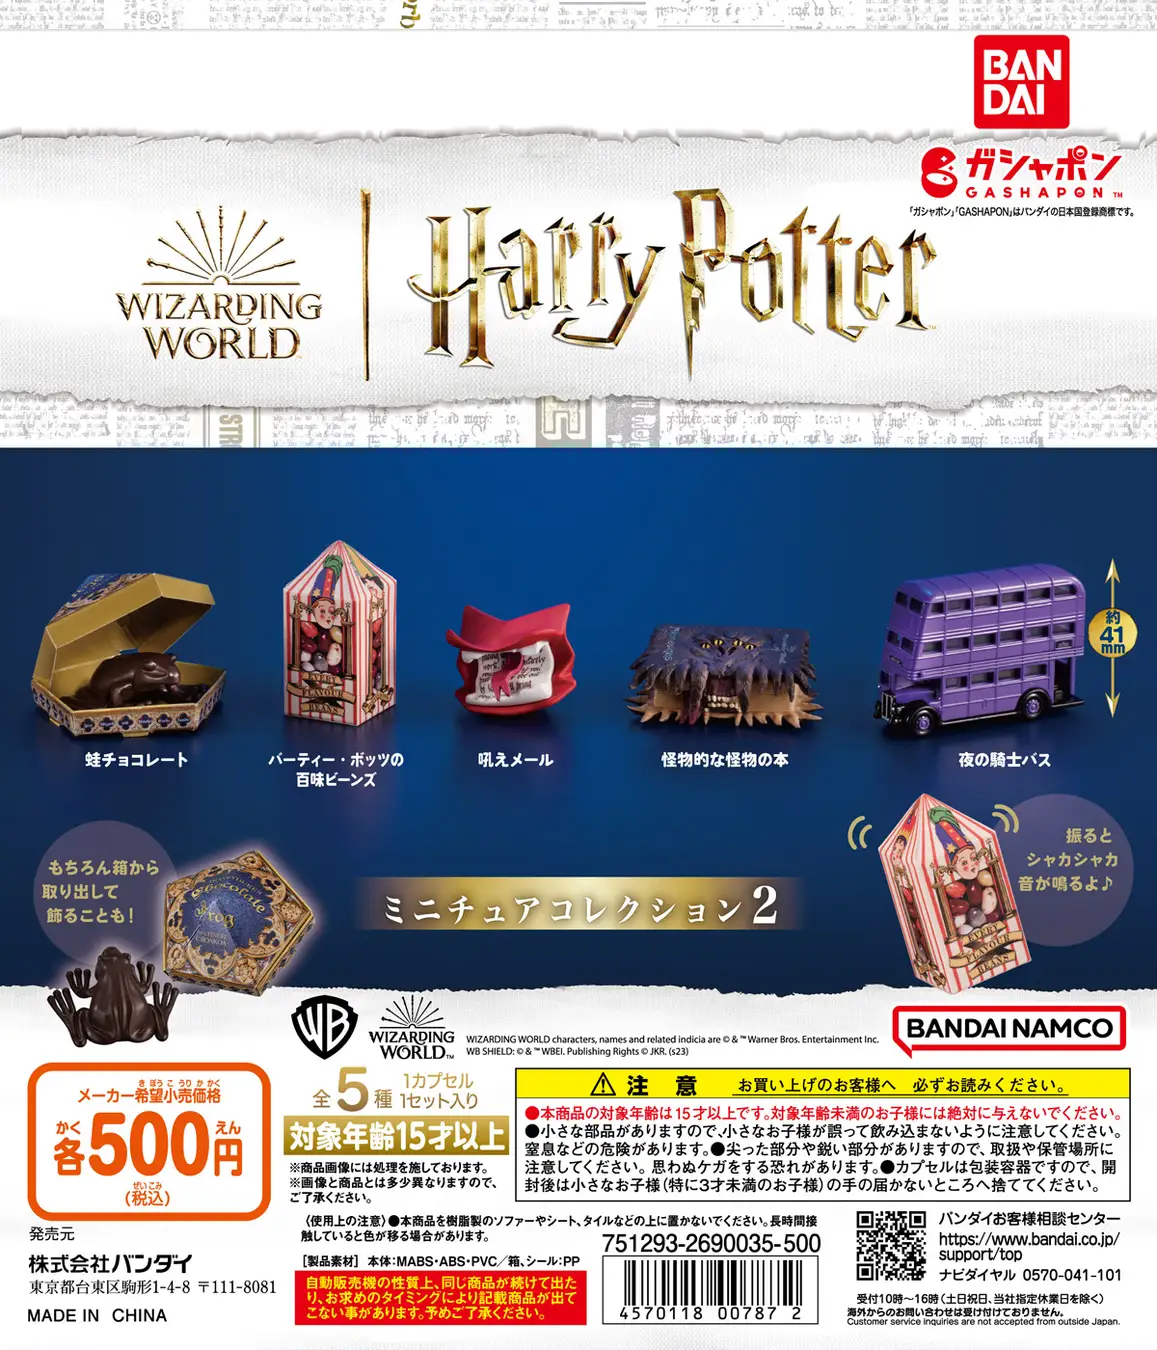 HARRY POTTER: MAGIC AWAKENED, PORTKEY GAMES, WIZARDING WORLD characters, names and related indicia © and ™ Warner Bros. Entertainment Inc. WIZARDING WORLD, HARRY POTTER and FANTASTIC BEASTS Publishing Rights © J.K. Rowling. (s23)